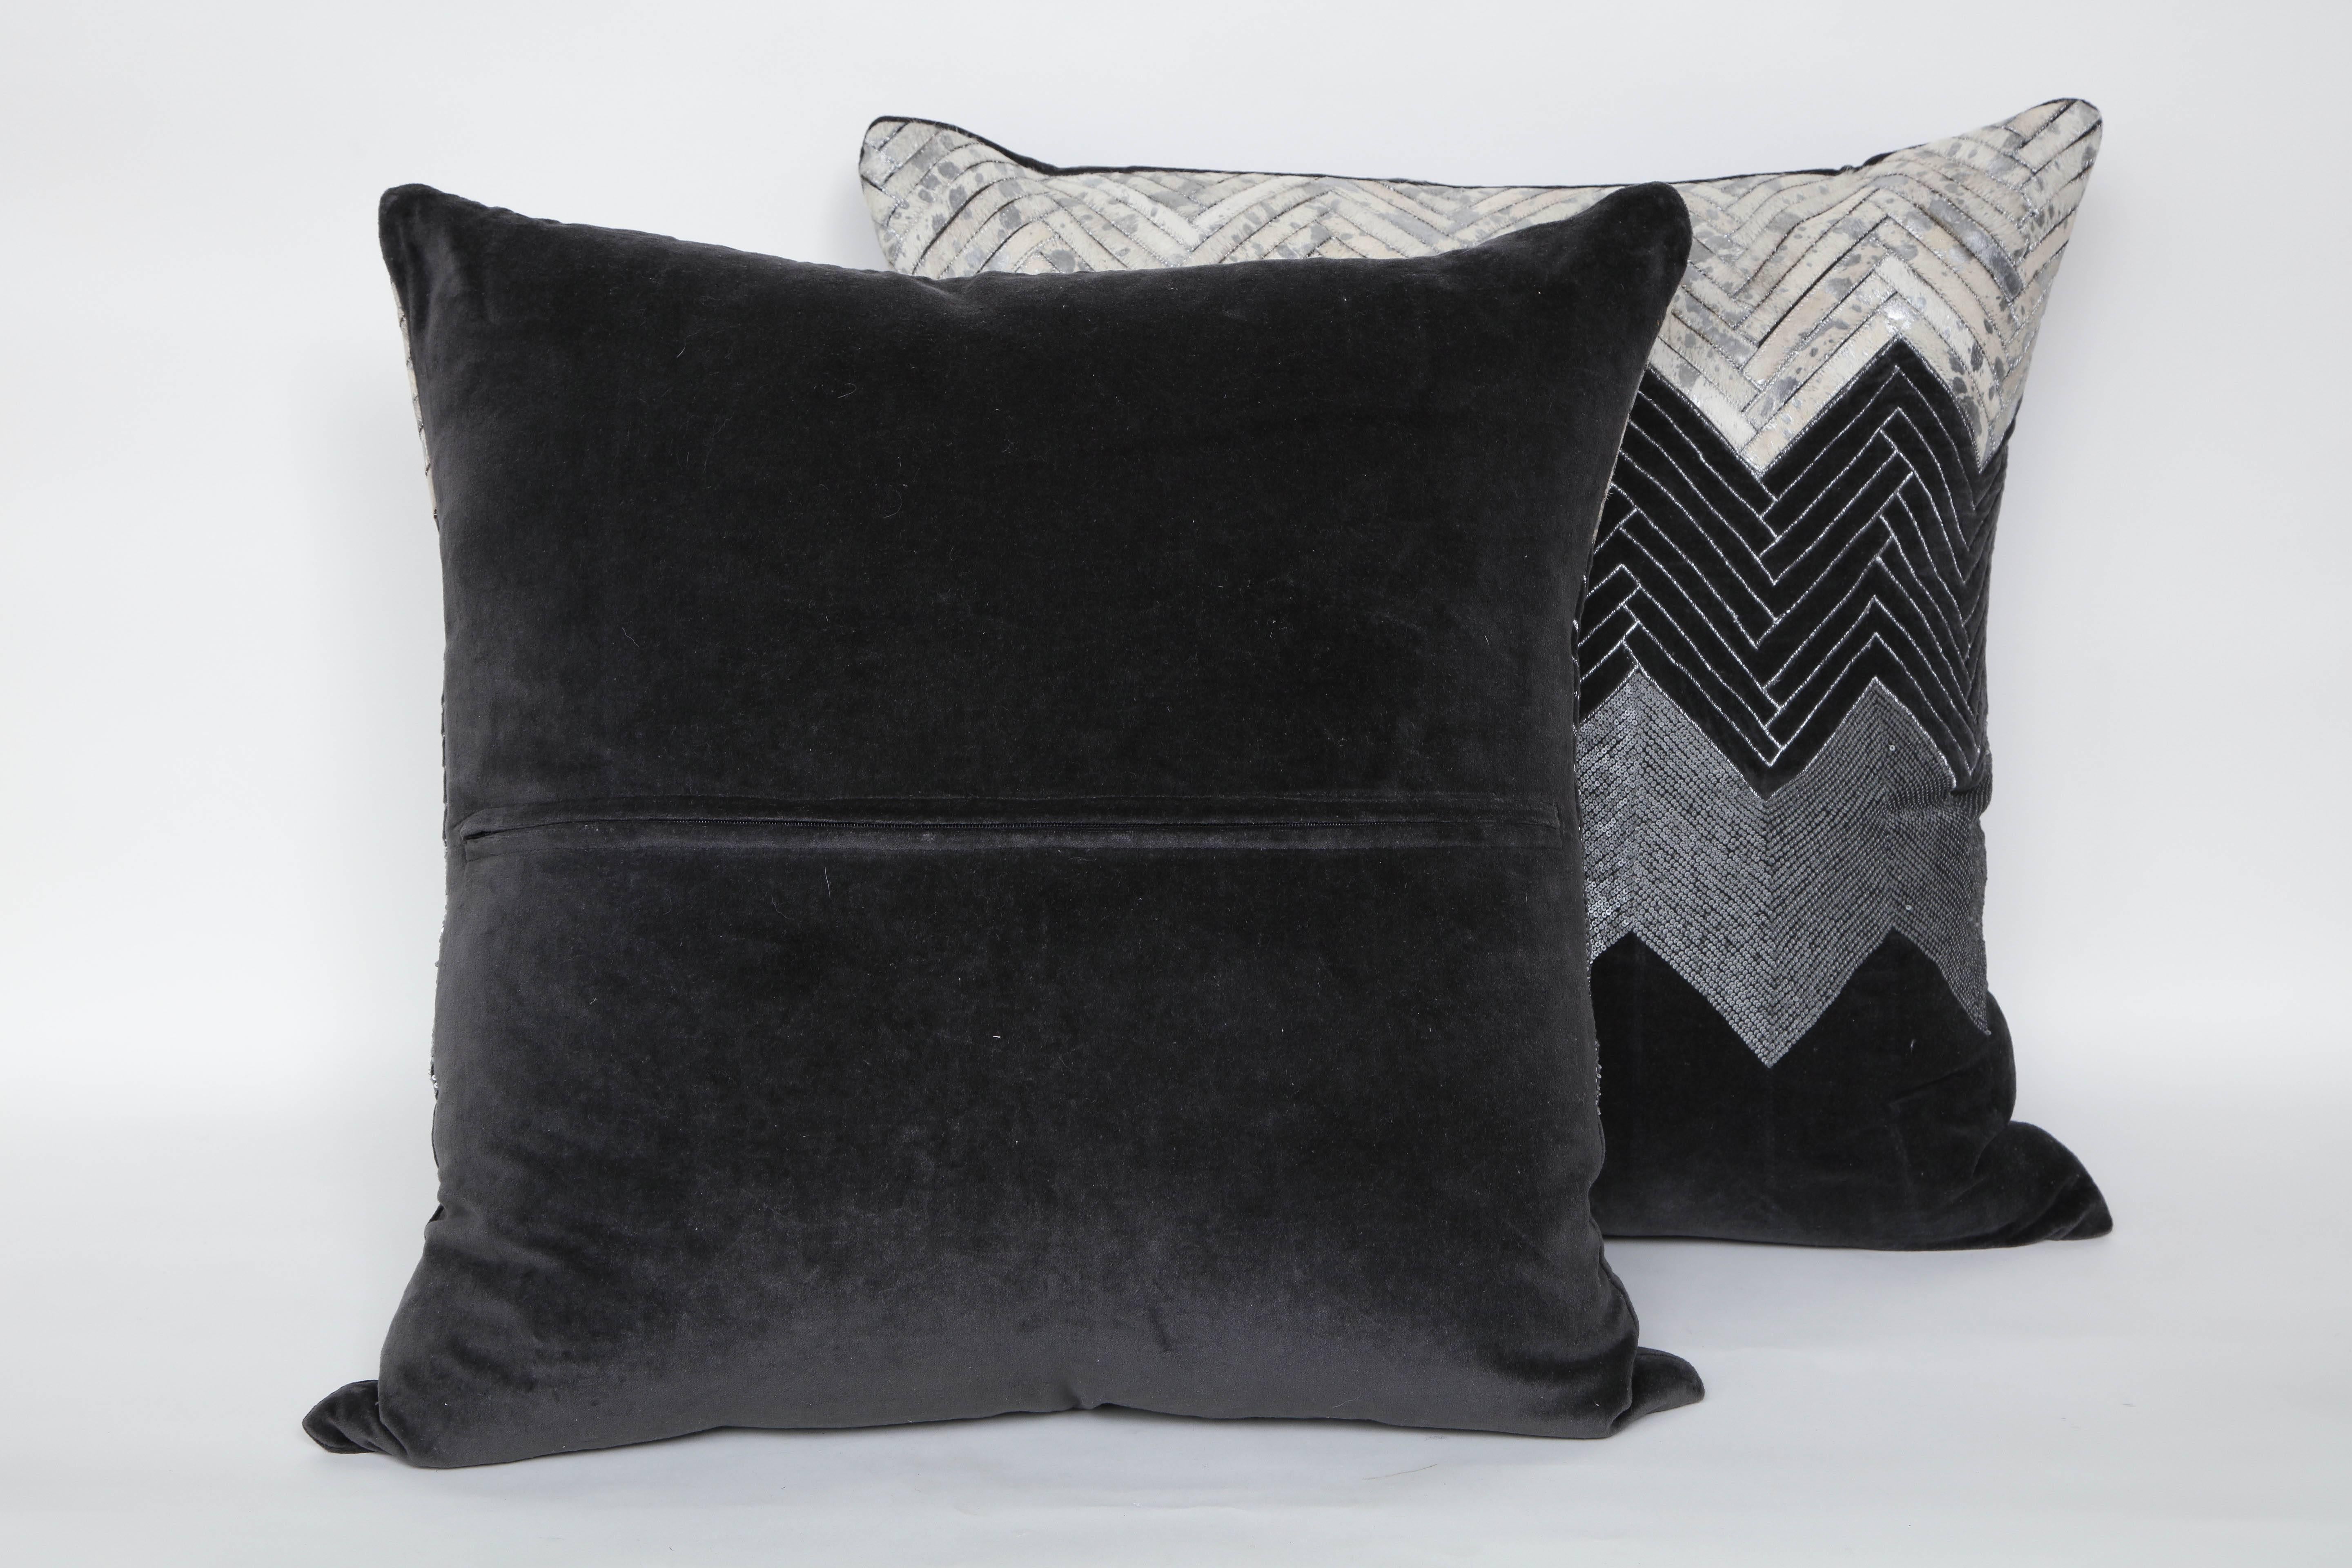 Pair of handmade pillows with bands of stitched white brindle hide, edge stitched velvet, and matte pewter mini sequins with grey velvet backs. Pillow inserts are feather and down, hidden zipper closure.